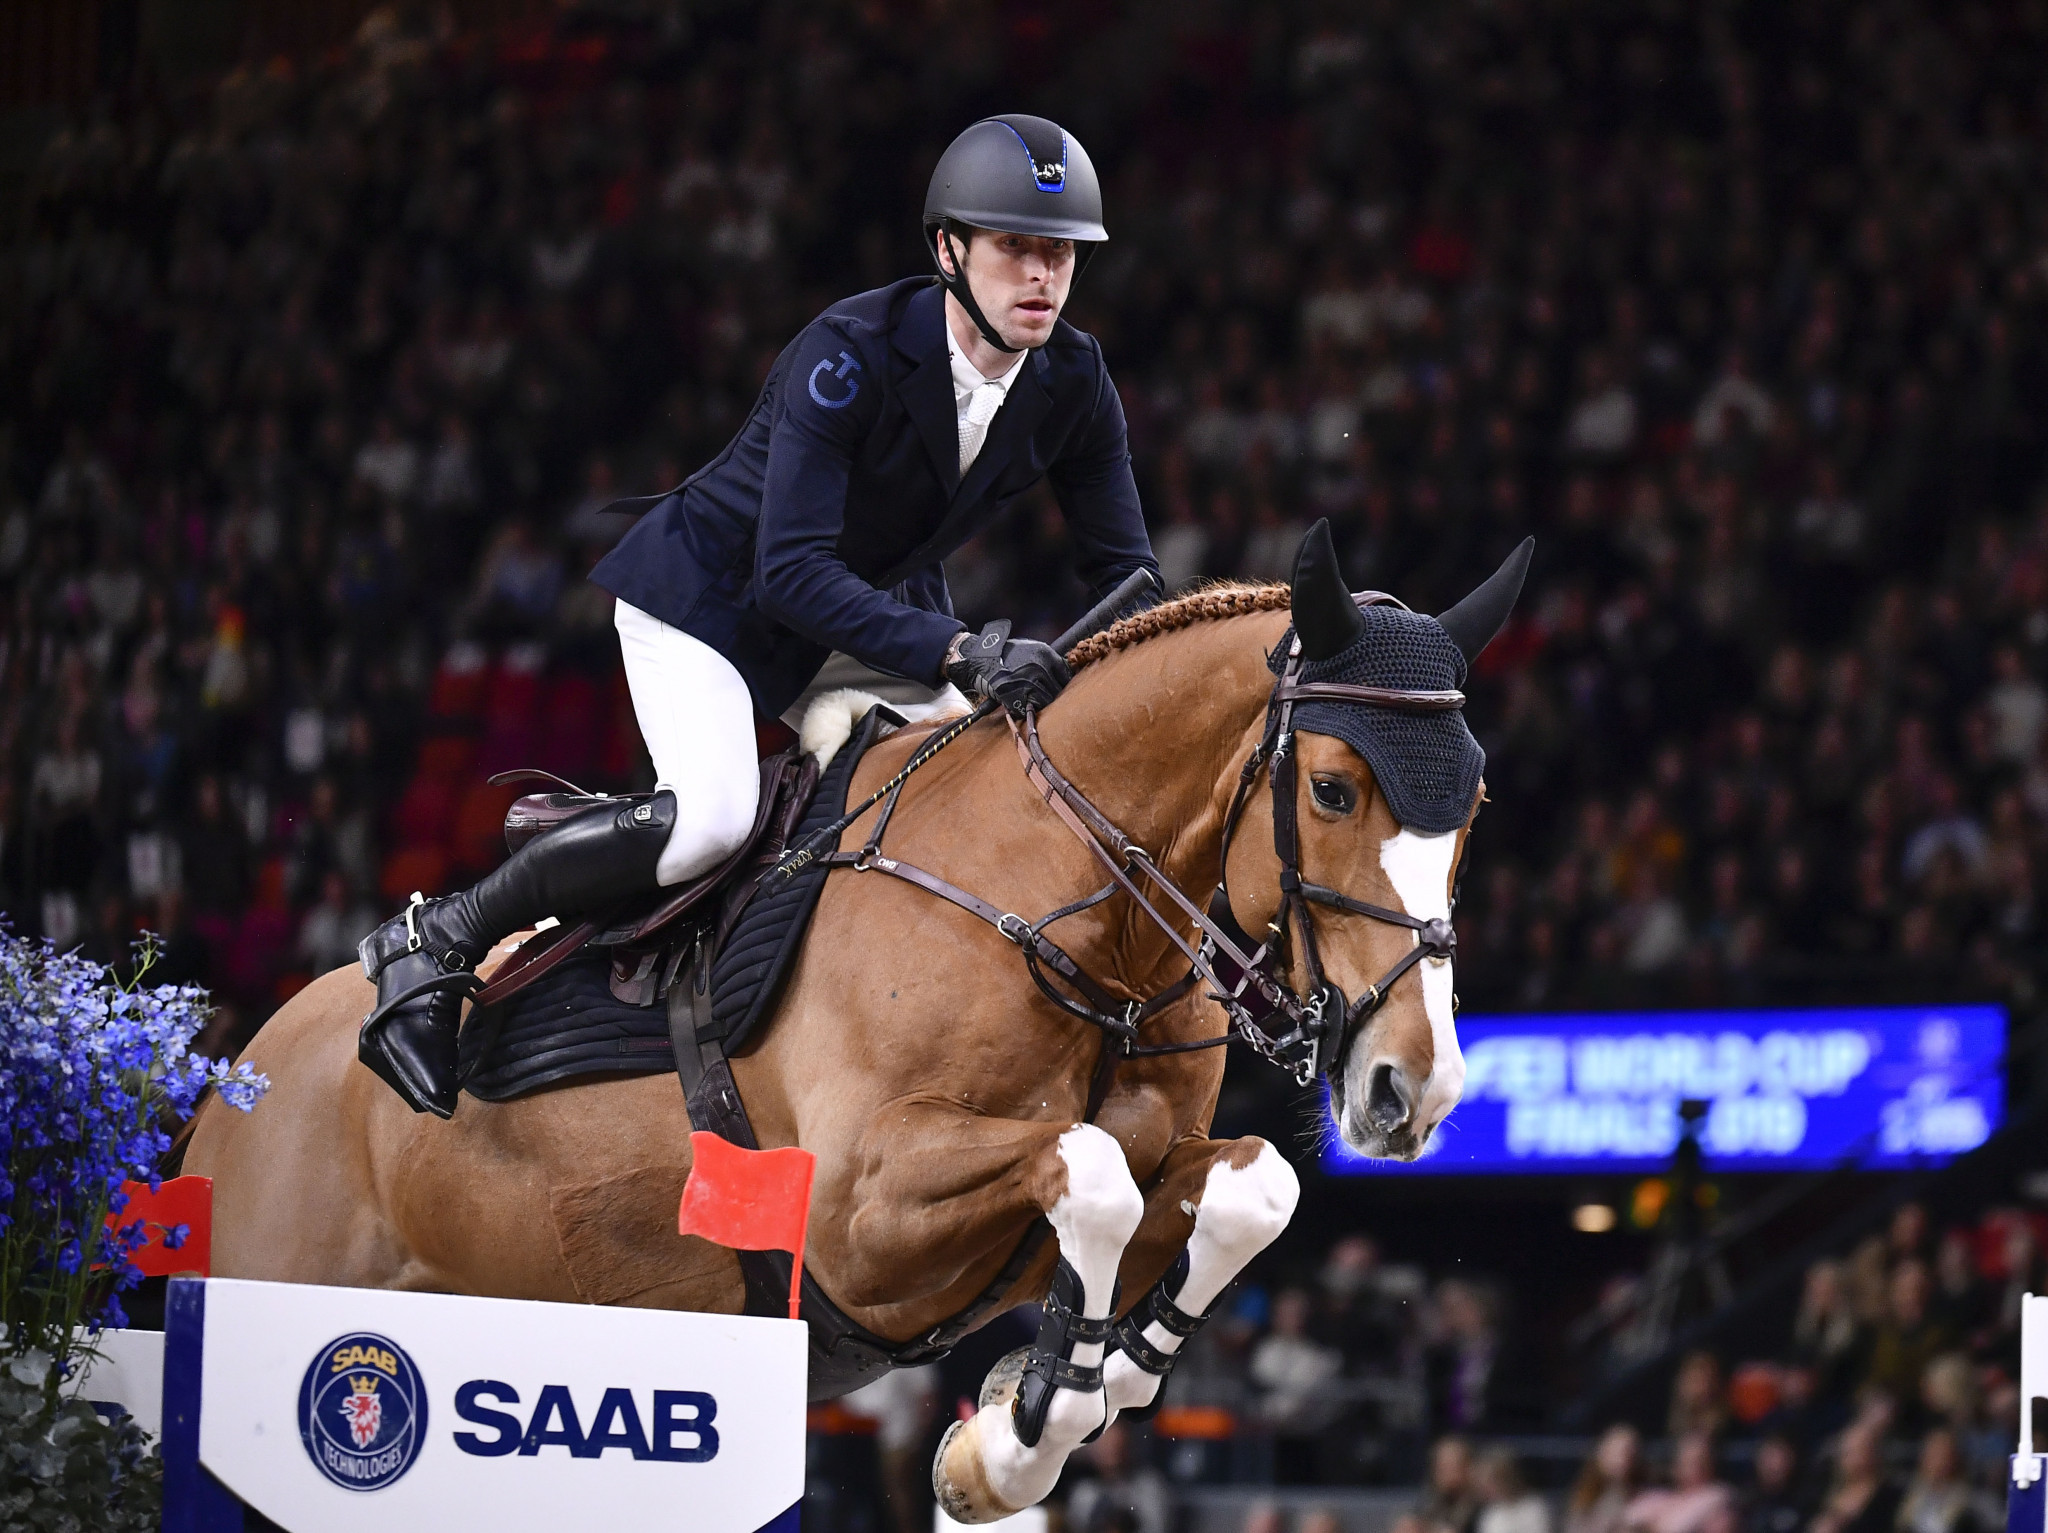 Belgium’s Pieter Devos has gained the lead in the Longines Global Champions Tour ©Getty Images